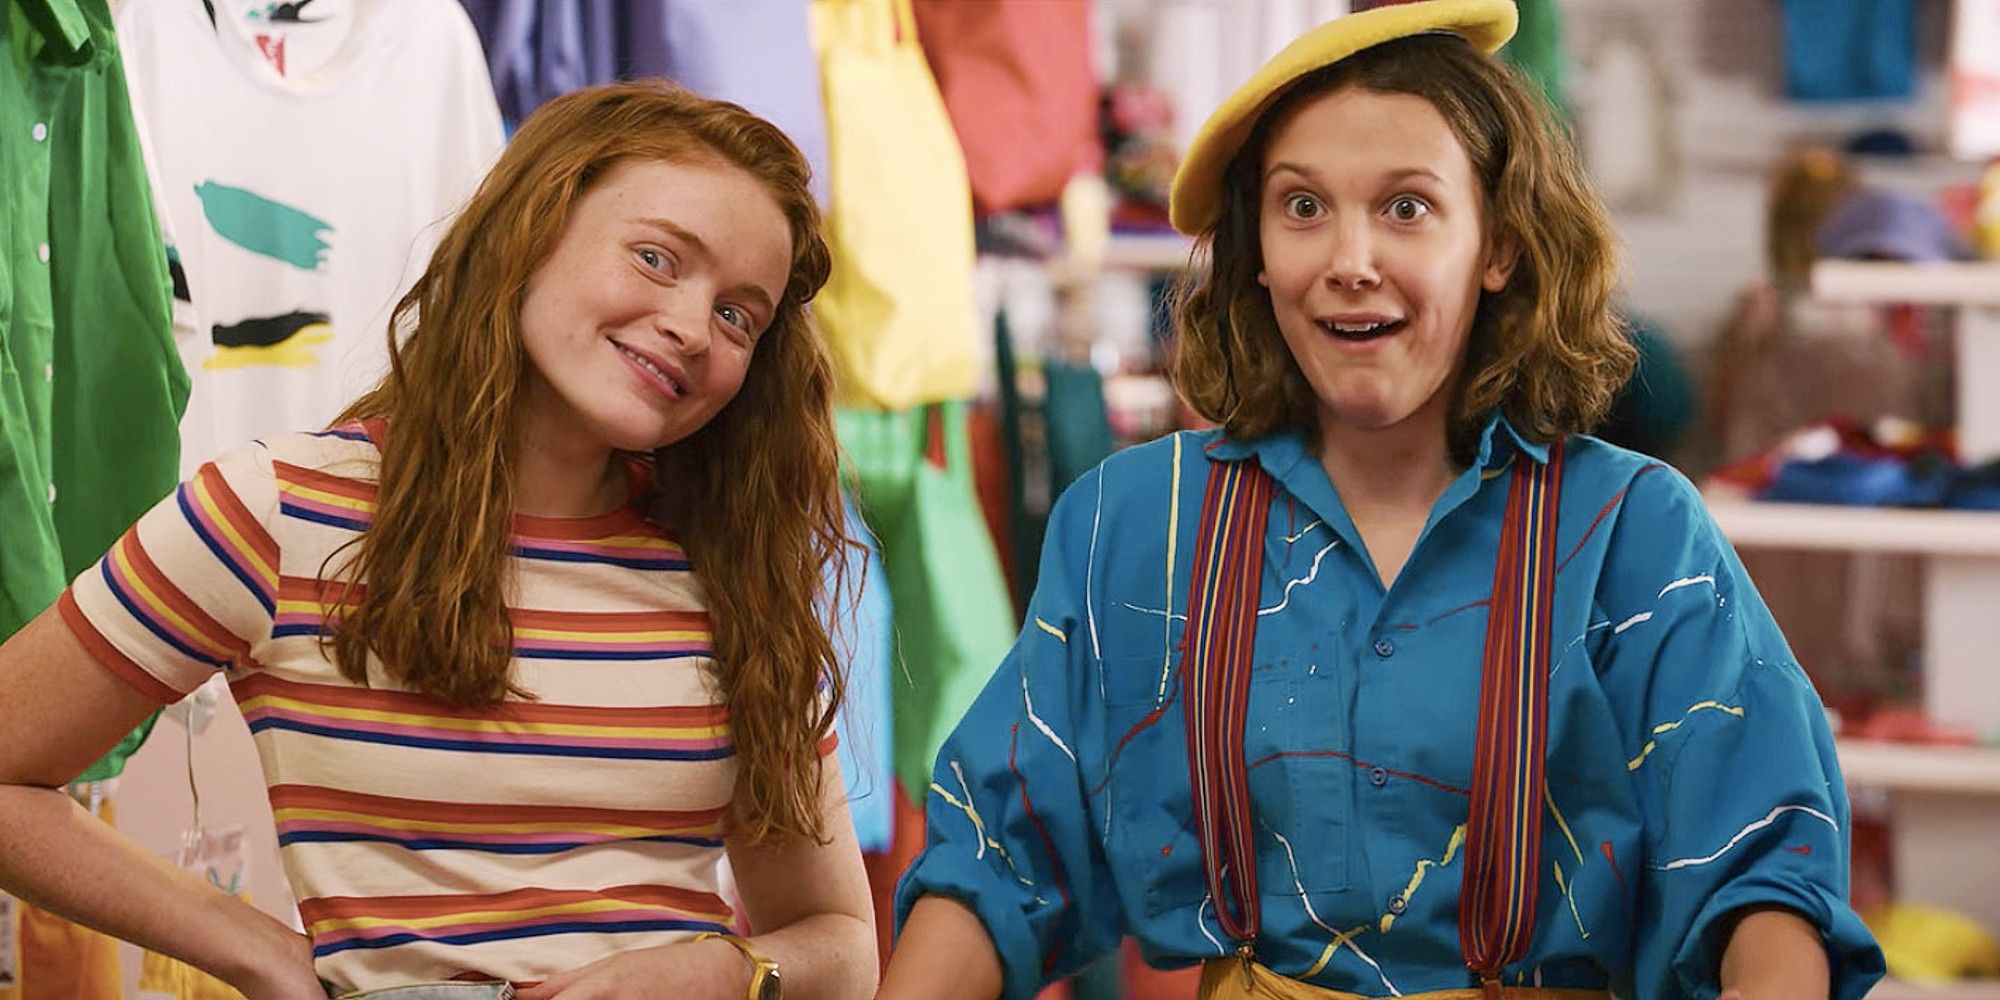 Sadie Sink and Millie Bobby Brown as Max and Eleven in Stanger Things